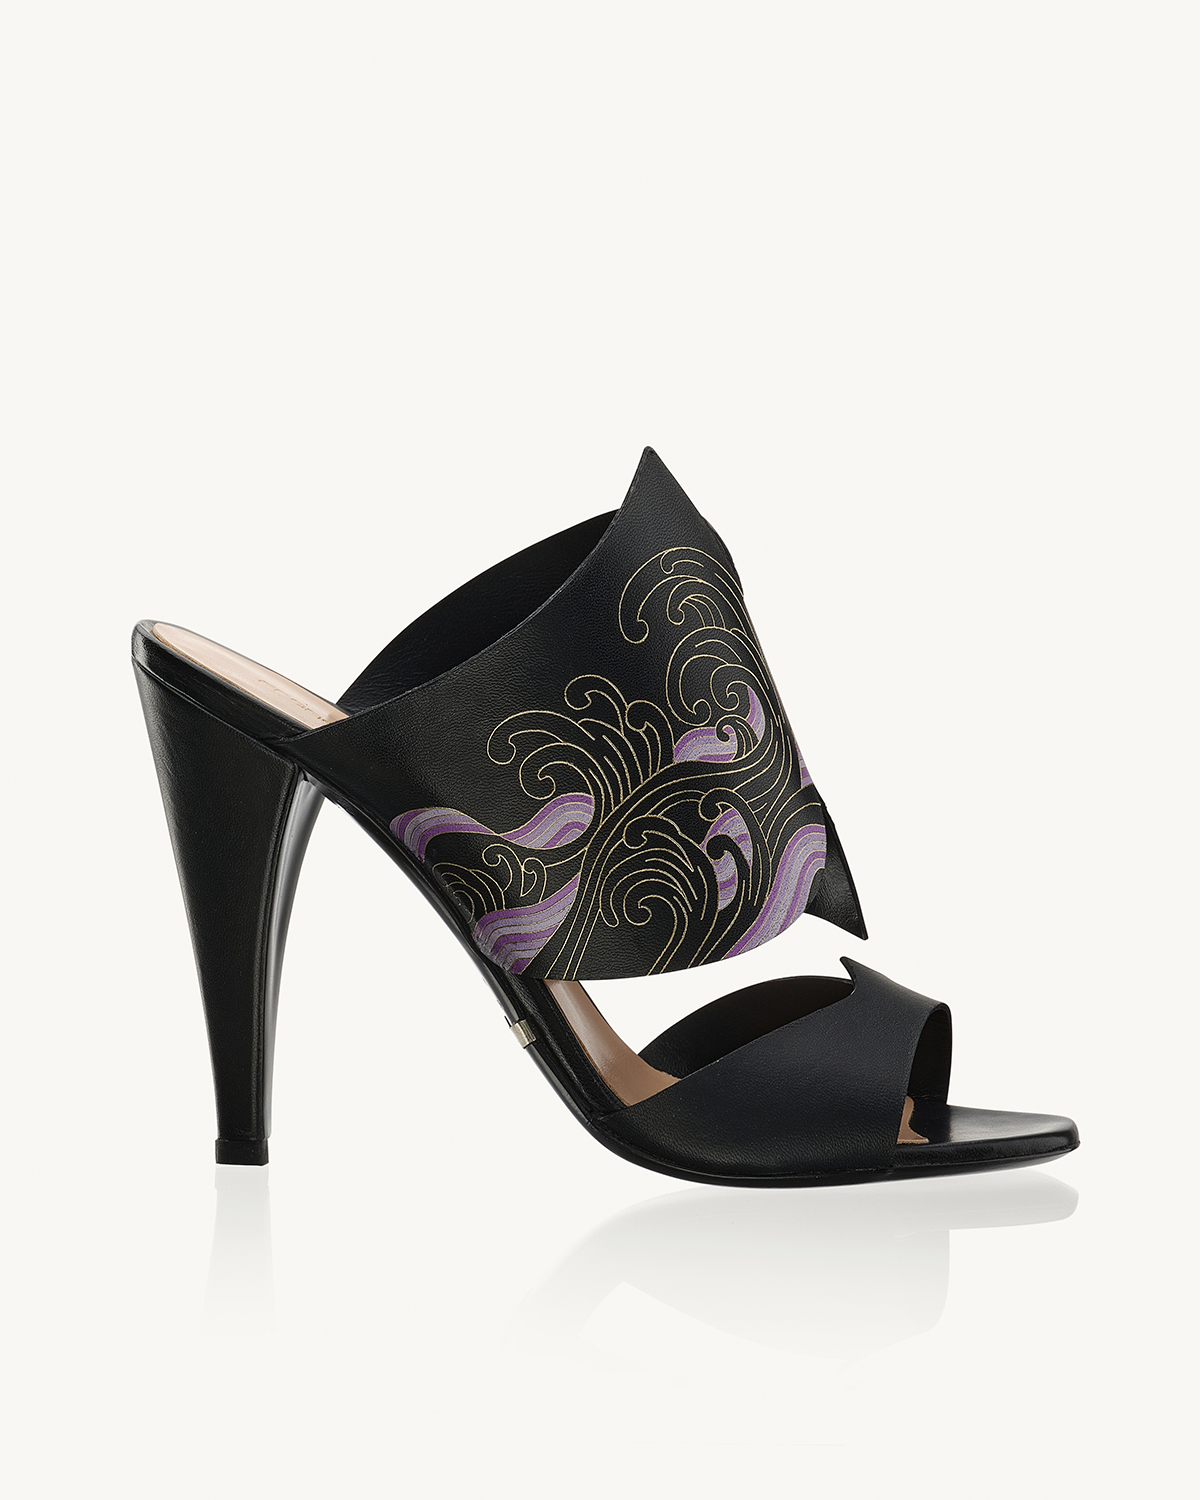 Okinami 105 heel sandal in black nappa leather with pattern in gold foil Francesco Lanzoni Shoes